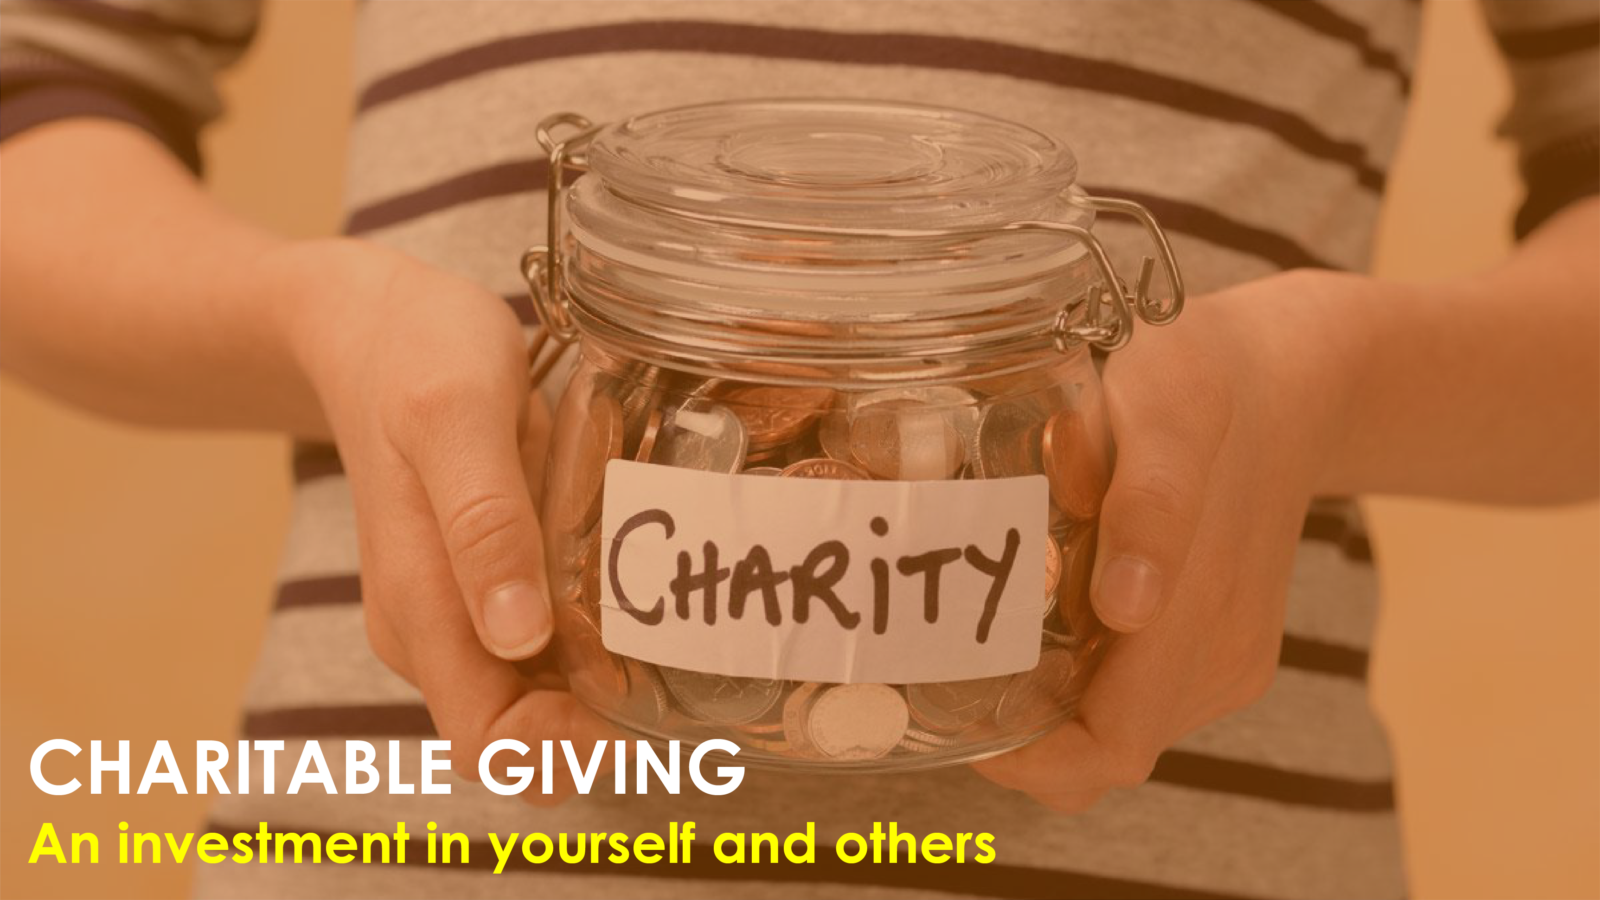 Charitable Giving Is an Investment in Yourself and Others